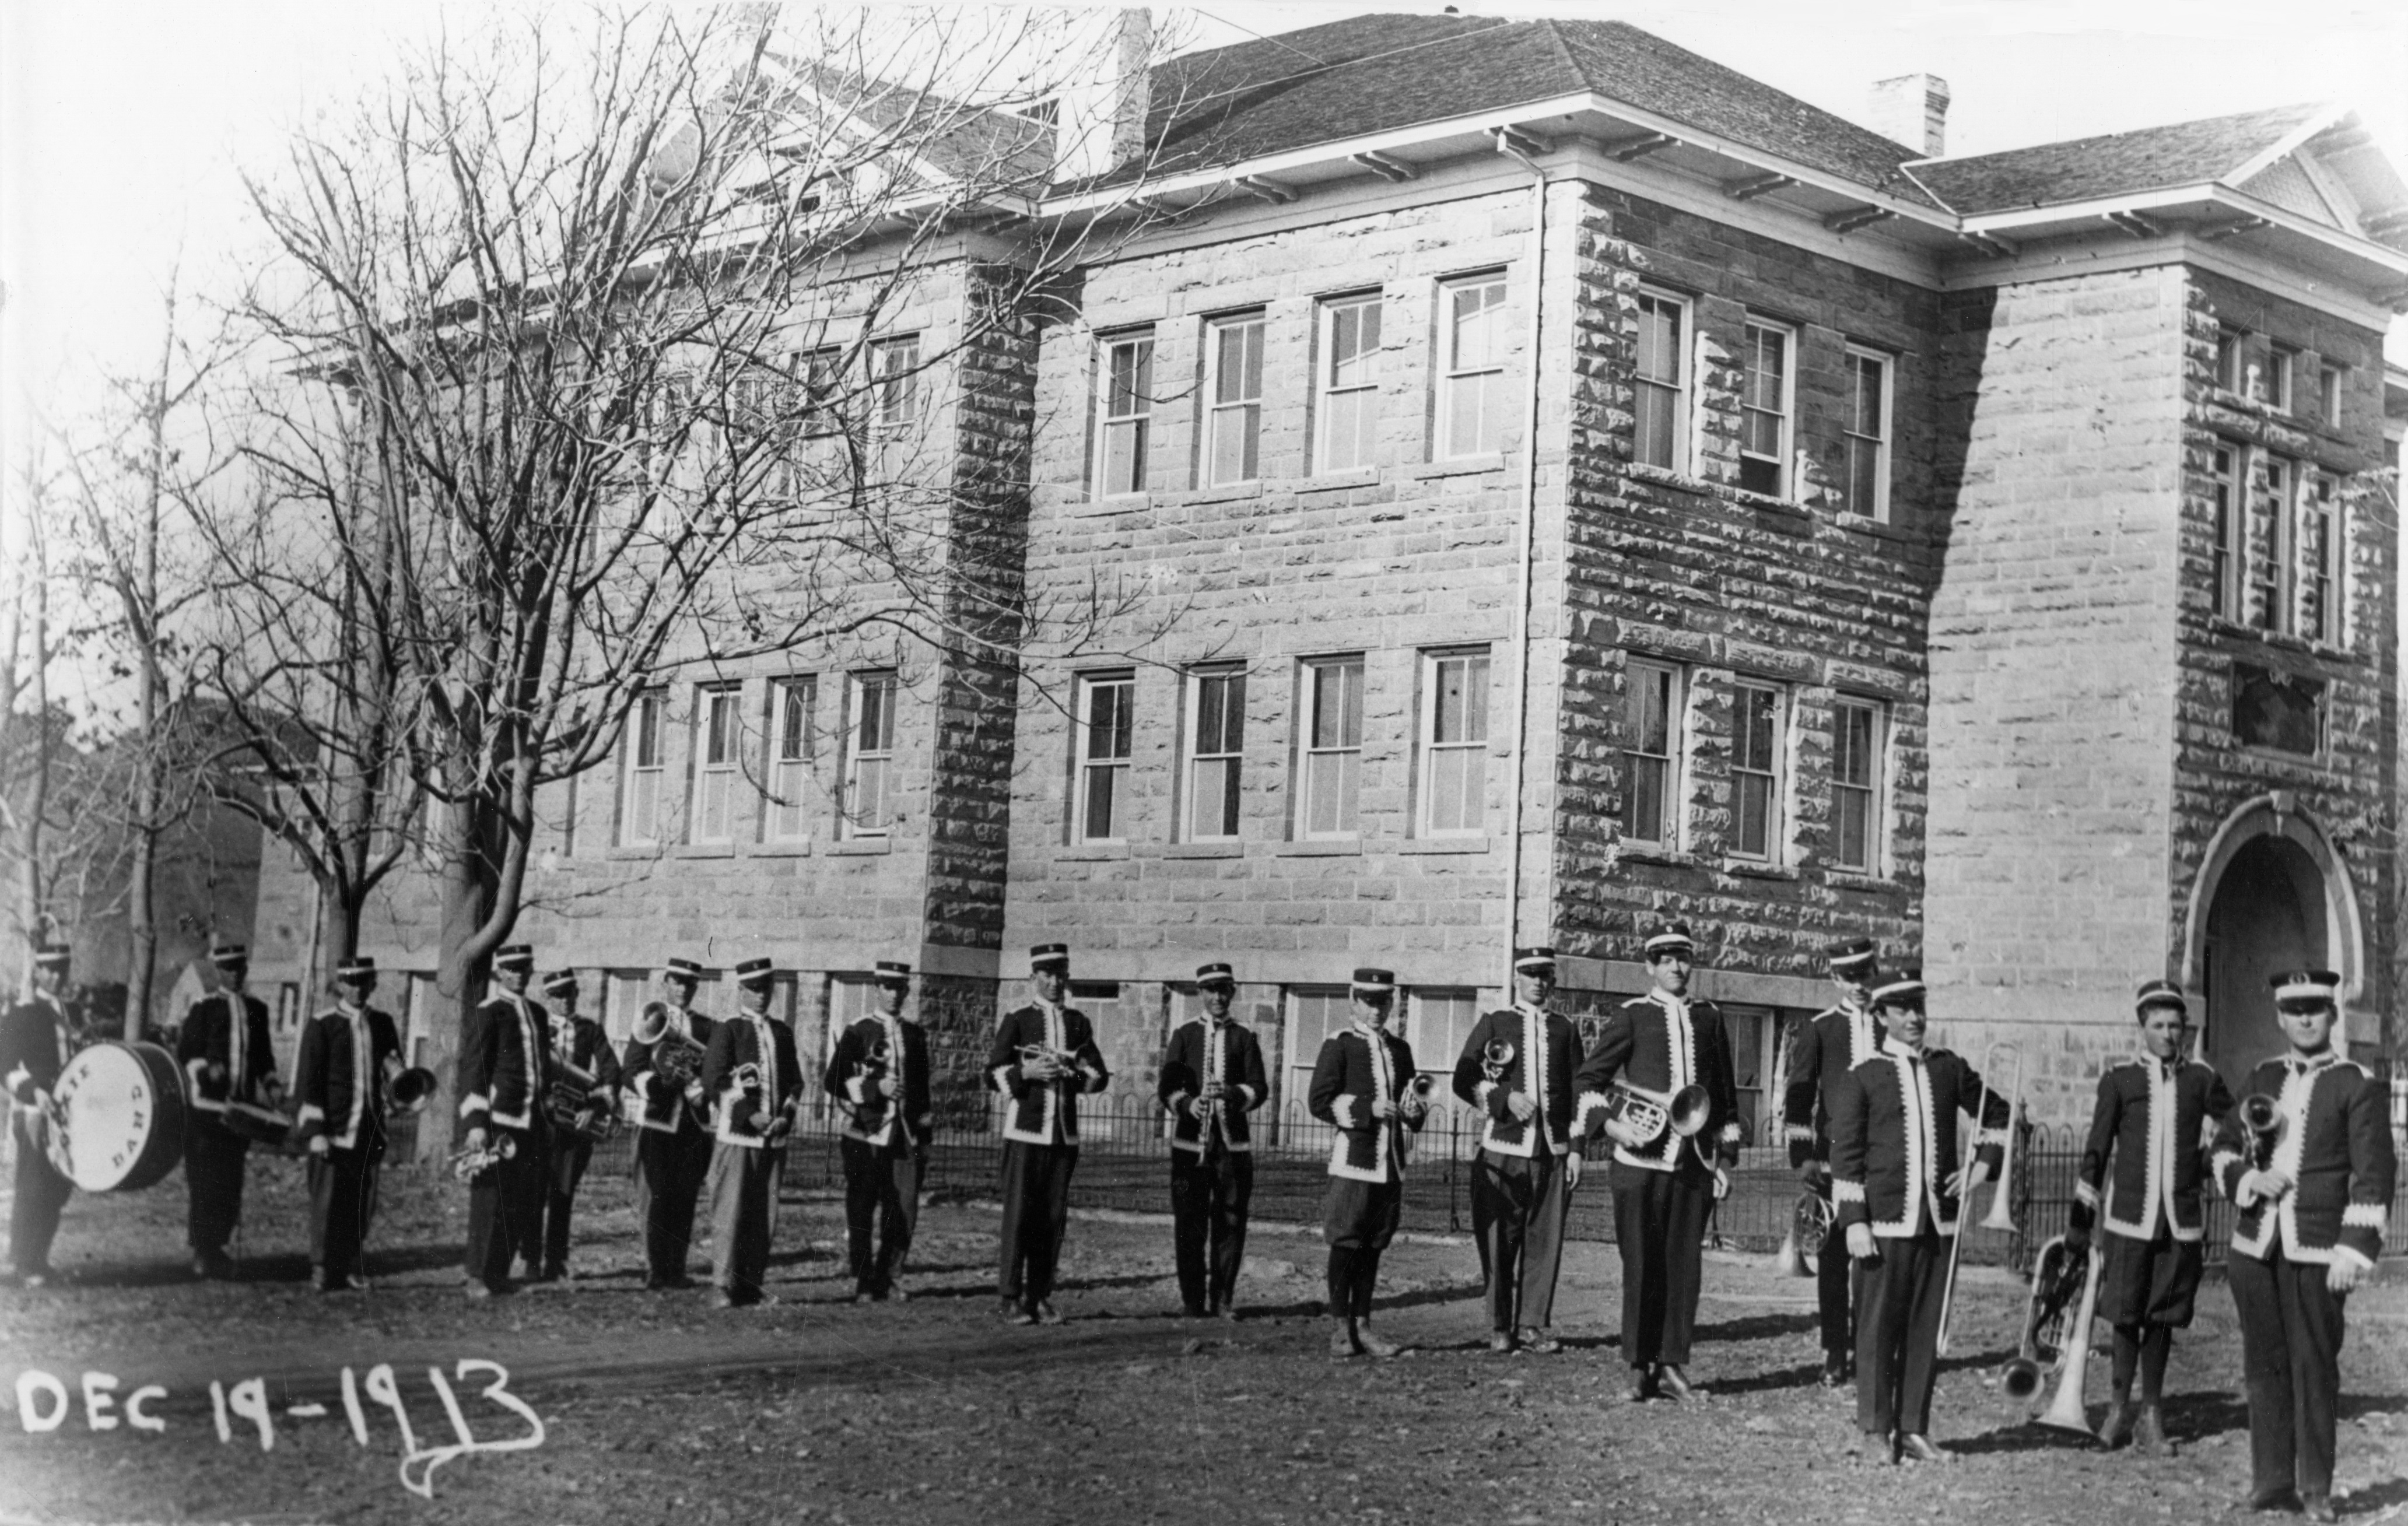 The Dixie Band in front of the old Dixie Academy building